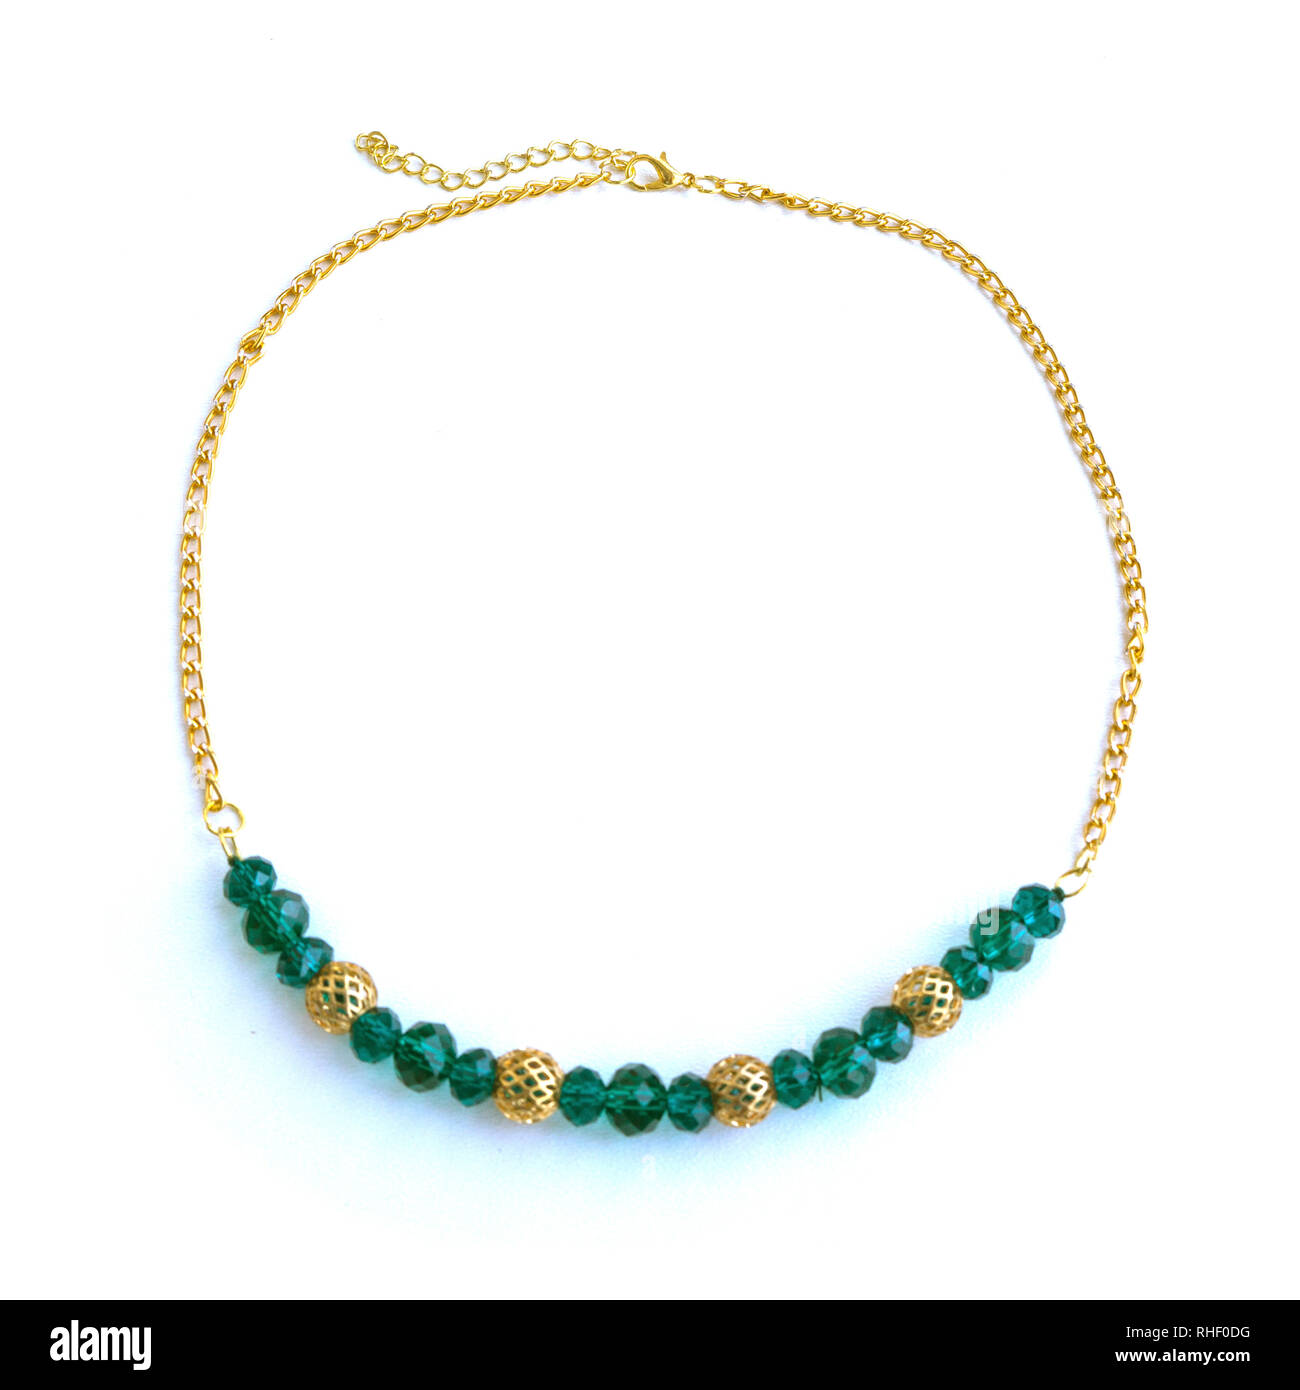 Handmade necklace from green beads and gold chain. Stock Photo